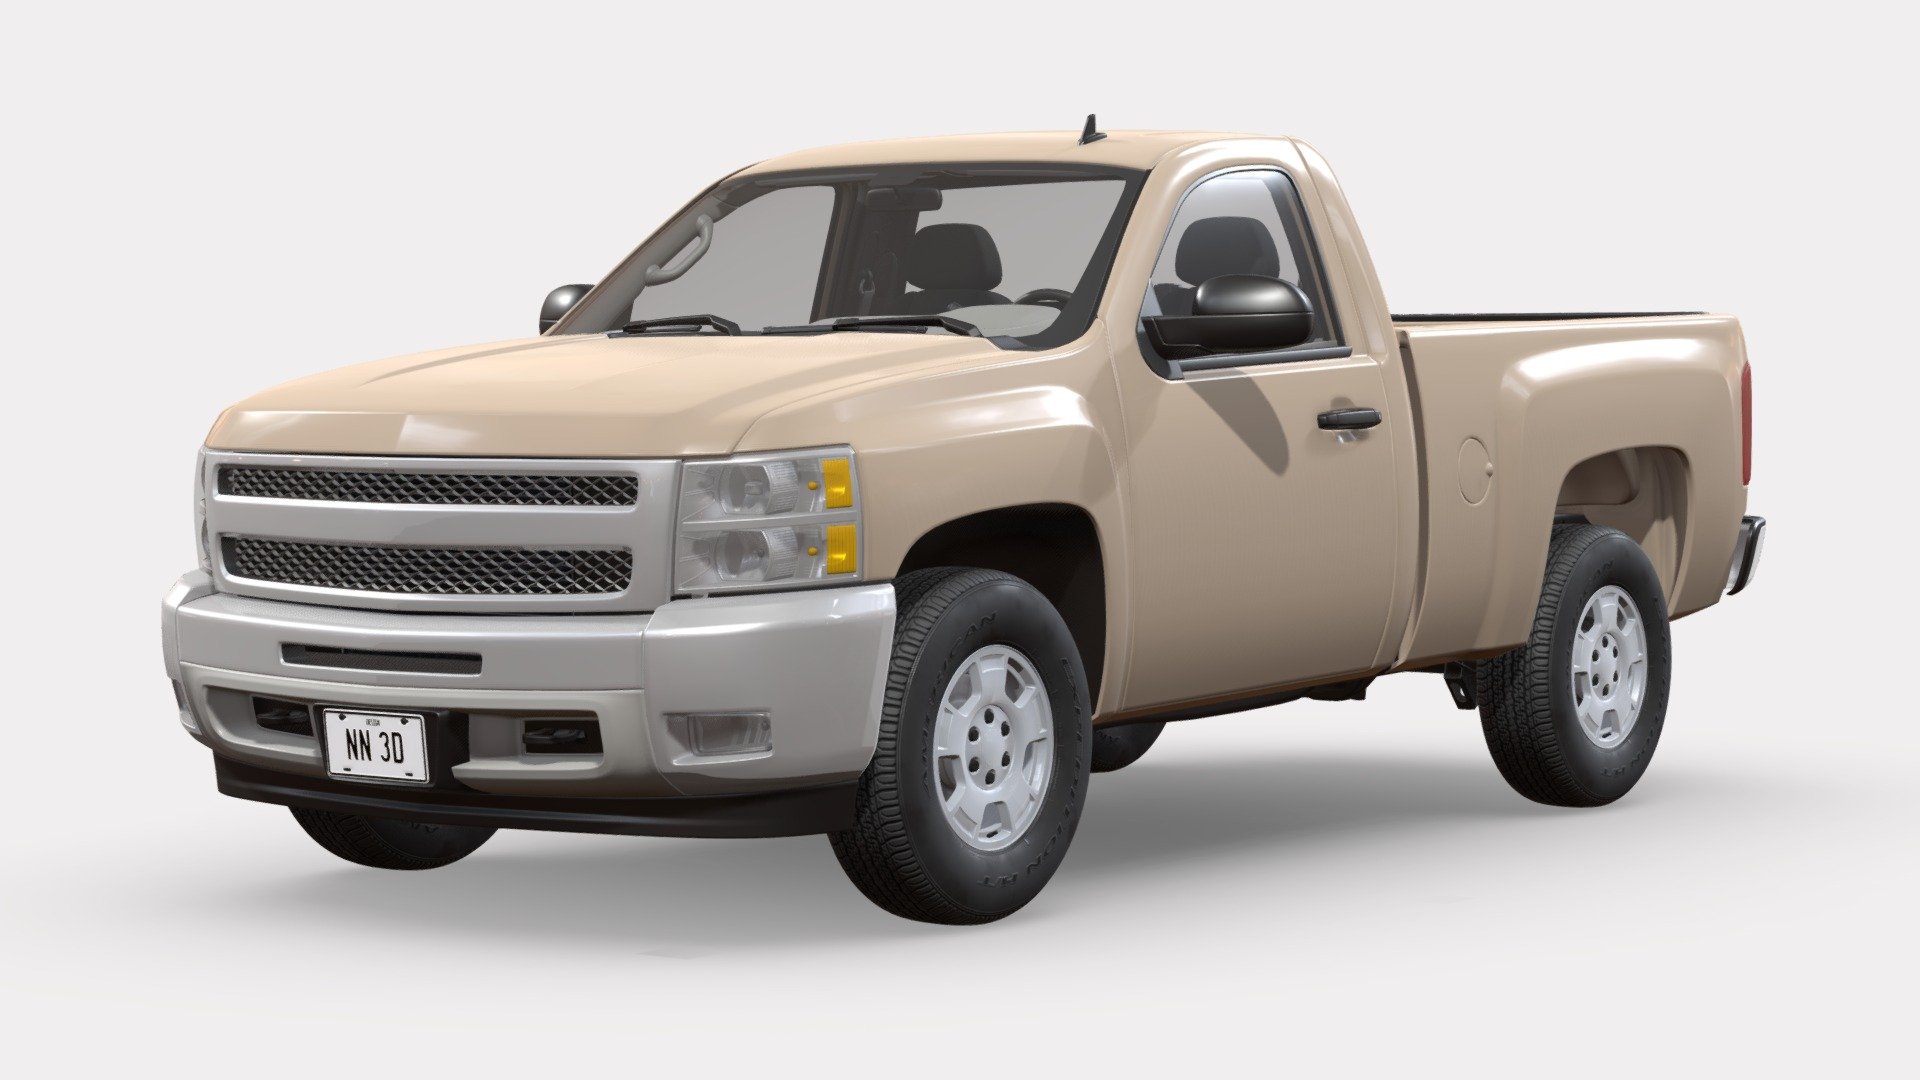 NN 3D store.

3D model of a modern 4wd pickup truck.

The truck's high detail exterior is great for close up renders, the cabin, chassis and drivetrain have been extensively detailed for close range shots.

The model was created with 3DS Max 2016 using the open subdivision modifier which has been left in the stack to adjust the level of detail.

There are also included HI and LO poly versions in Blender 2.9 format with textures.

Exchange files included: FBX, OBJ and 3DS, all with HI and LO subdivision versions.

SPECIFICATIONS:

The model has 158.000 polygons with subdivision level at 0 and 630.000 at level 1.

Renderer: V Ray and Cycles.

The model is fully textured and UV mapped with diffuse, bump, roughness and specular maps.

All materials and textures are included and mapped in all files, settings might have to be adjusted depending on the software you are using.

Textures are in JPG format with 4096x4096, 2048x2048 and 512x512 resolution 3d model